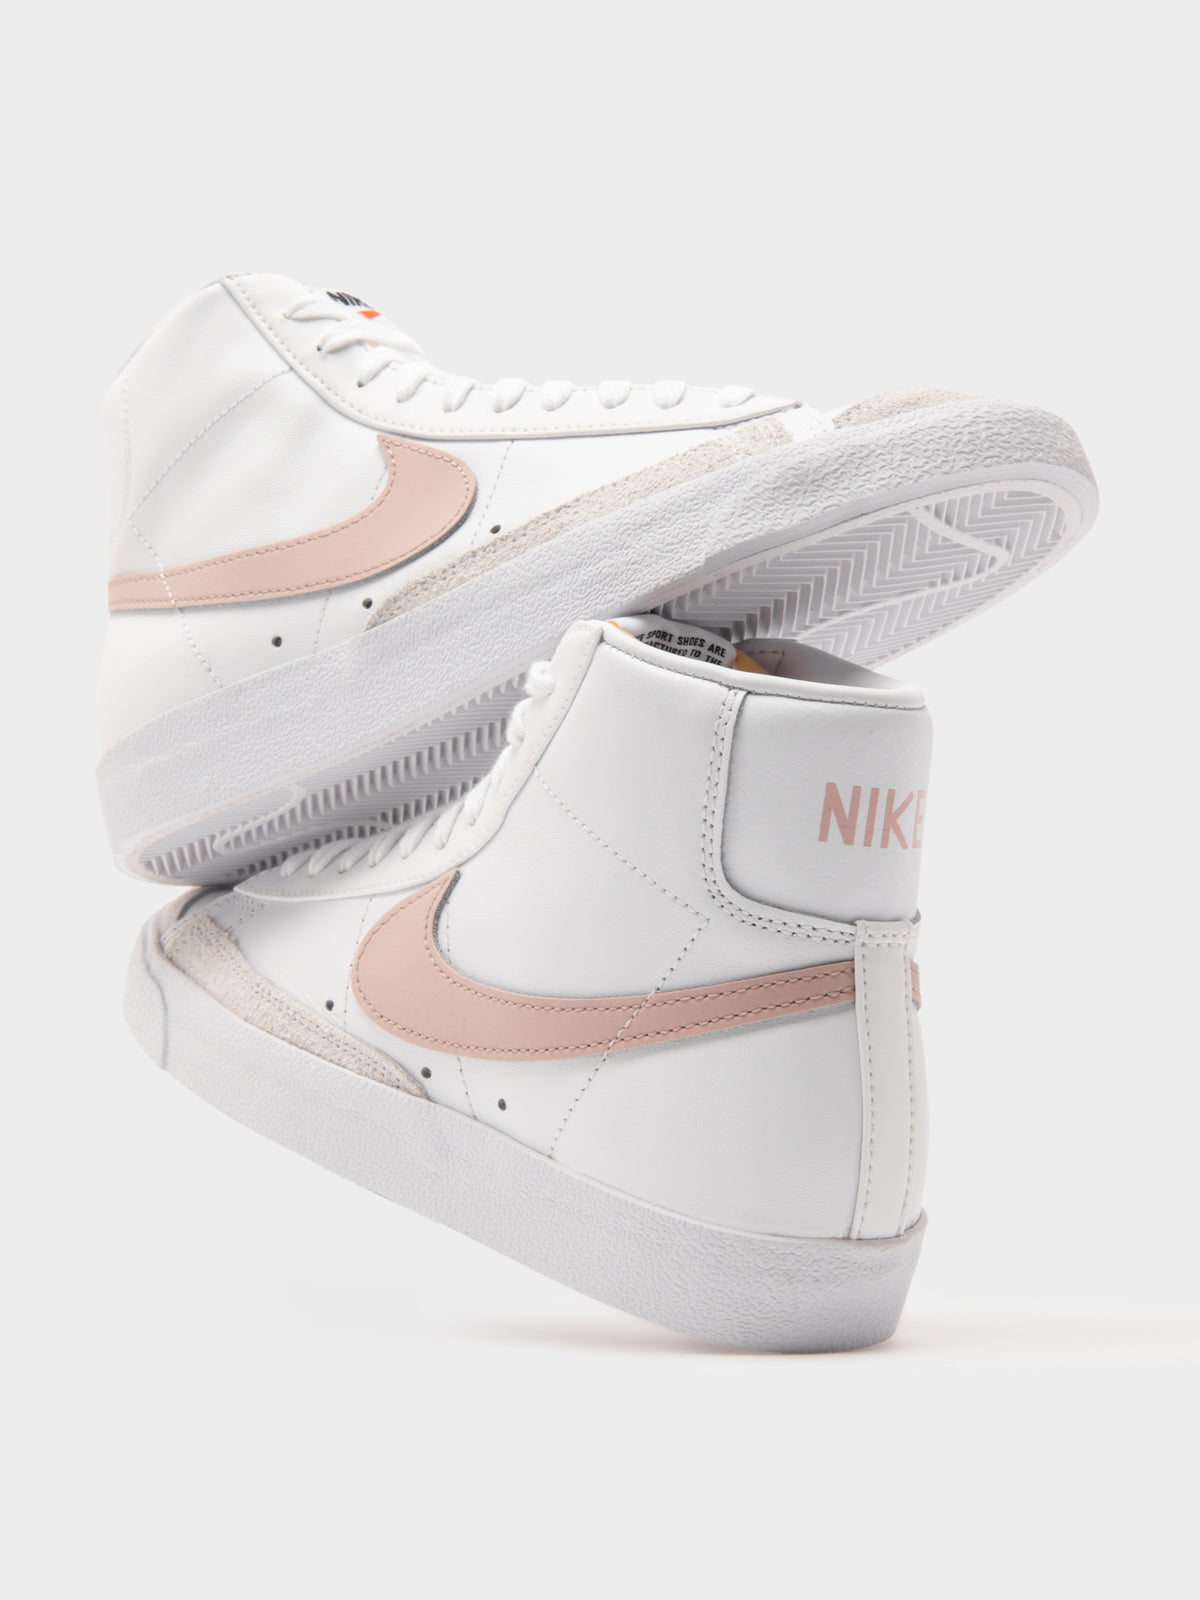 Womens Blazer Mid 77&#39; High Top Sneaker in White &amp; Pink Oxford